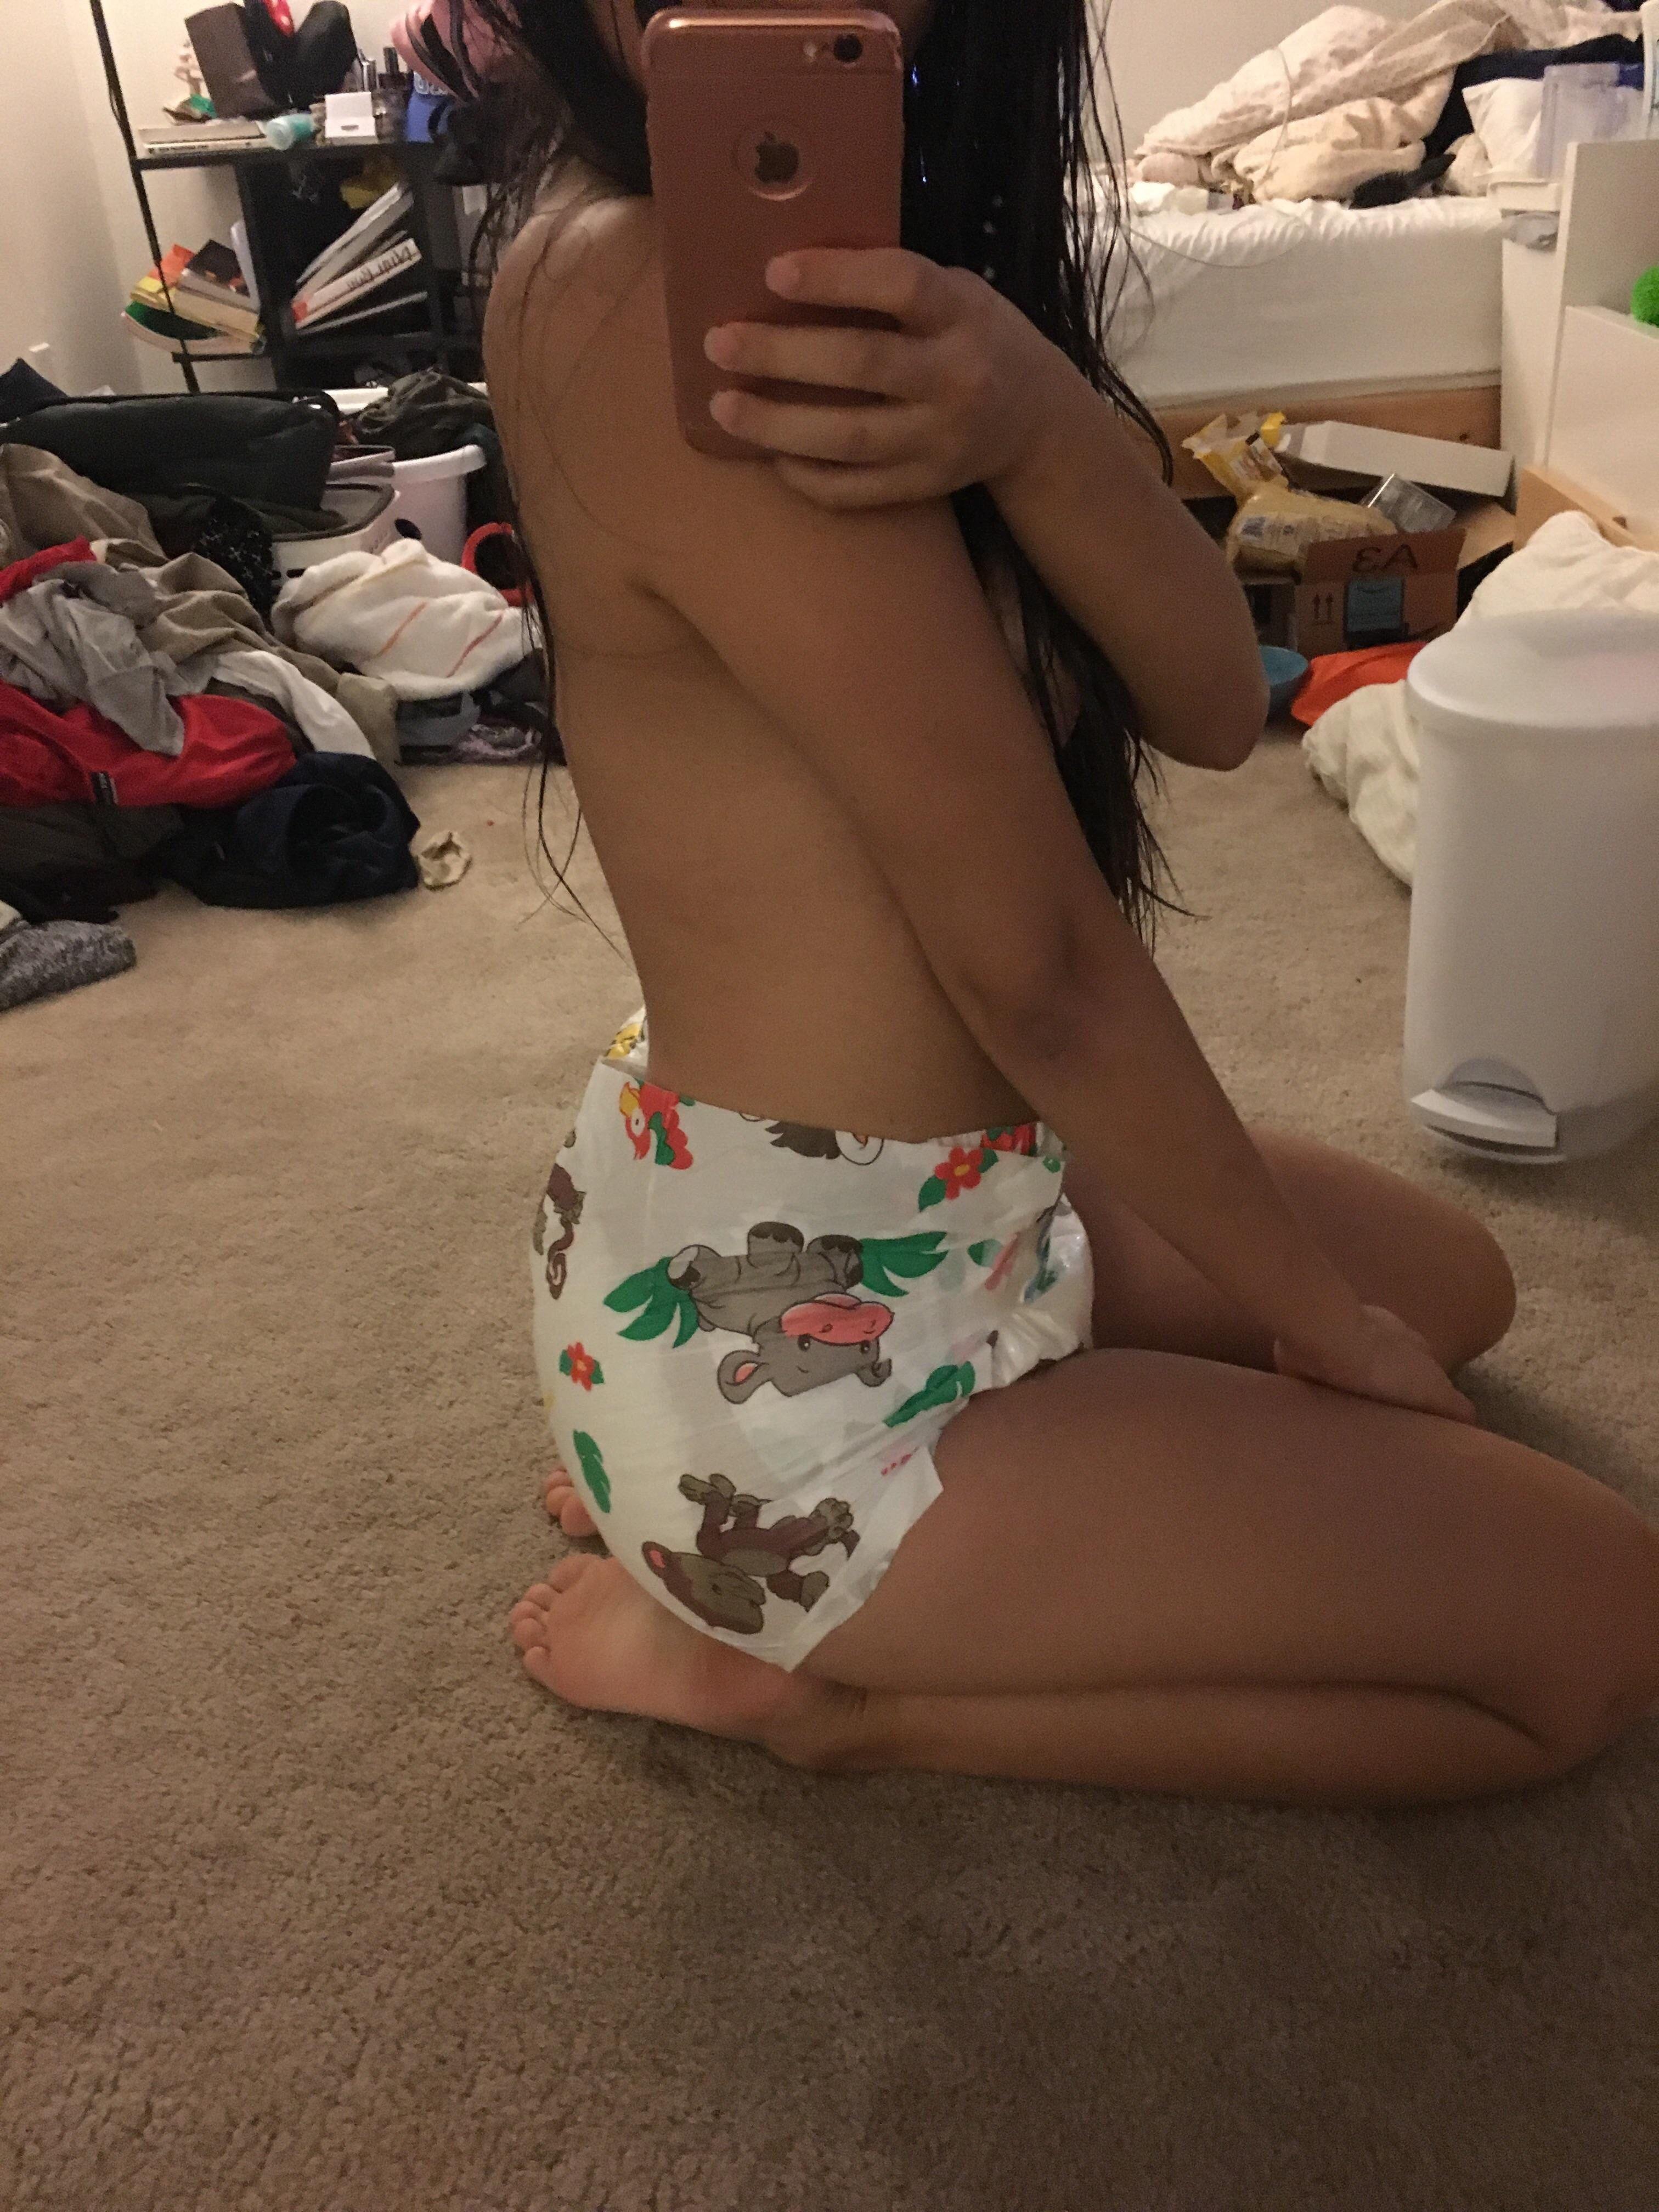 An old picture, but Daddy and I are LDR and he shipped me my favorite diapers :3 (x-posted r/littlespace)